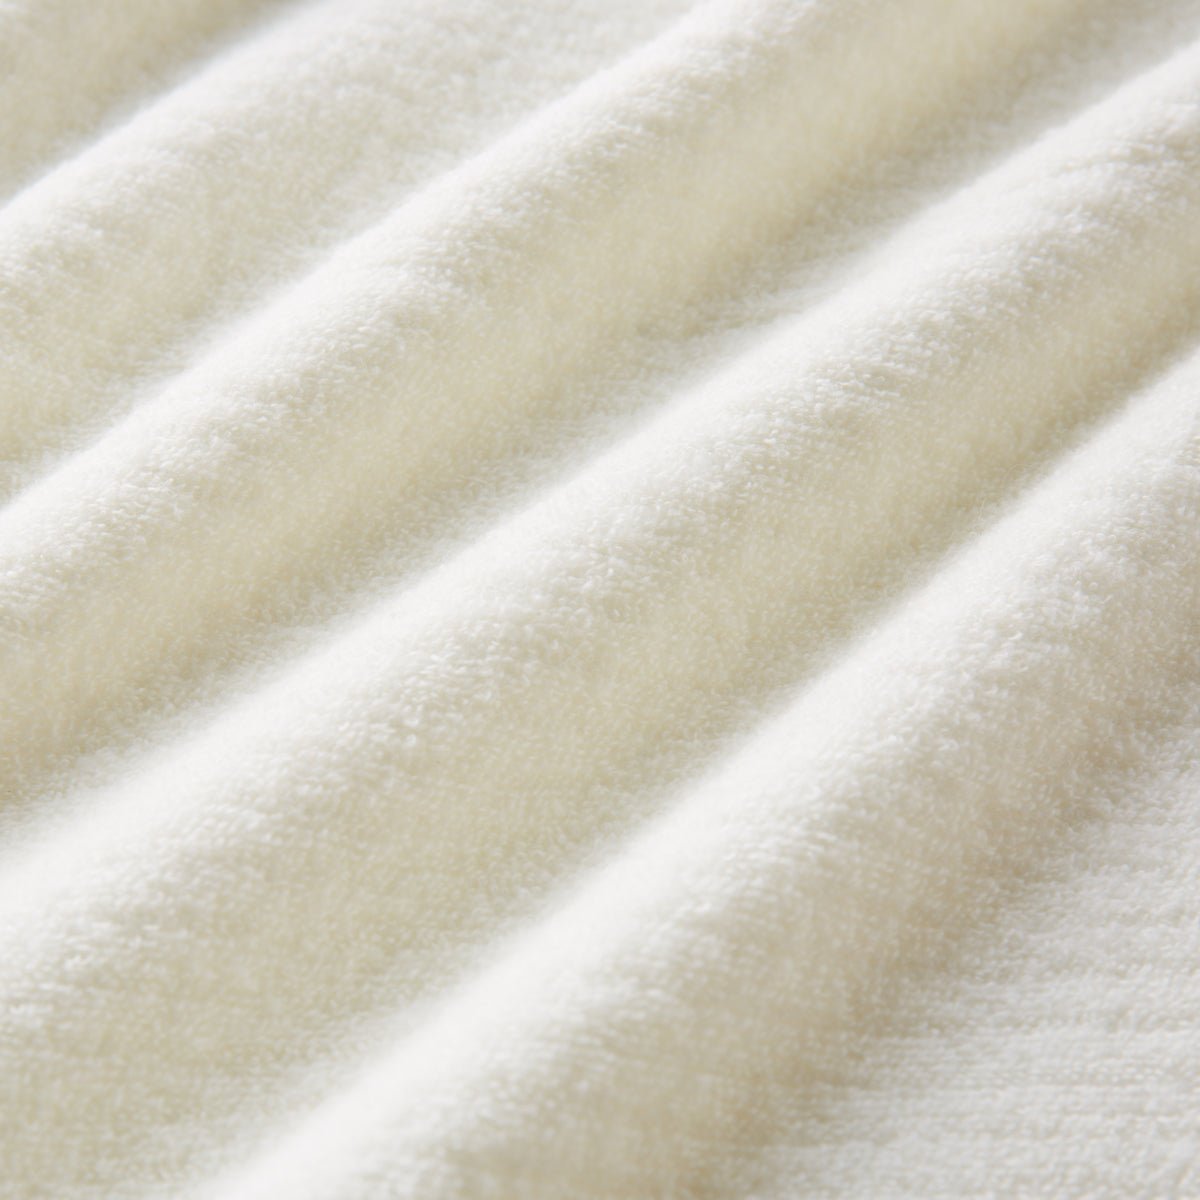 Untwisted Yarn Ultra Soft Fluffy Baby Blanket - MIKI HOUSE USA